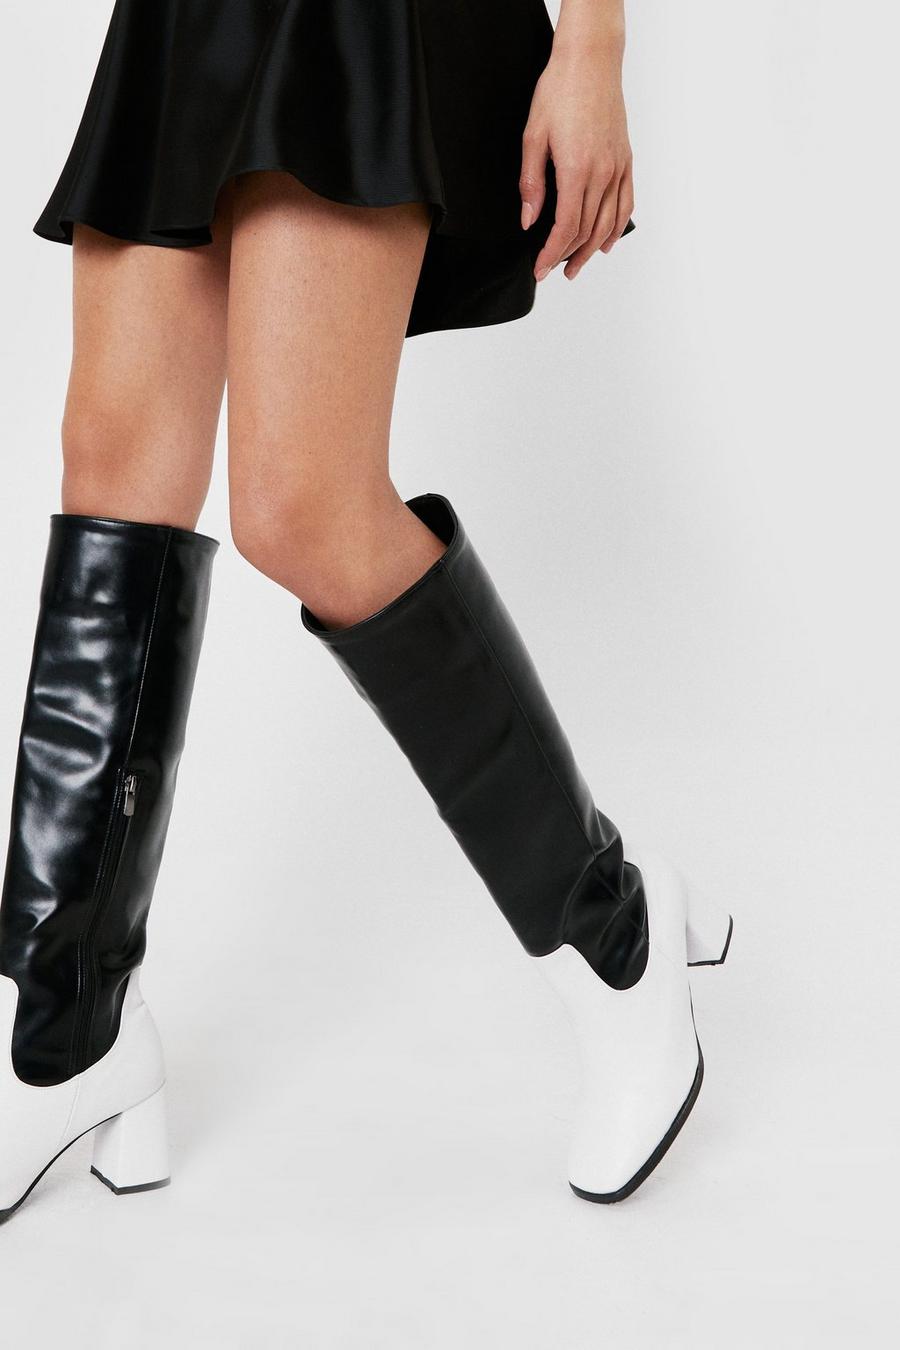 Black Two Tone Square Toe Knee High Boots